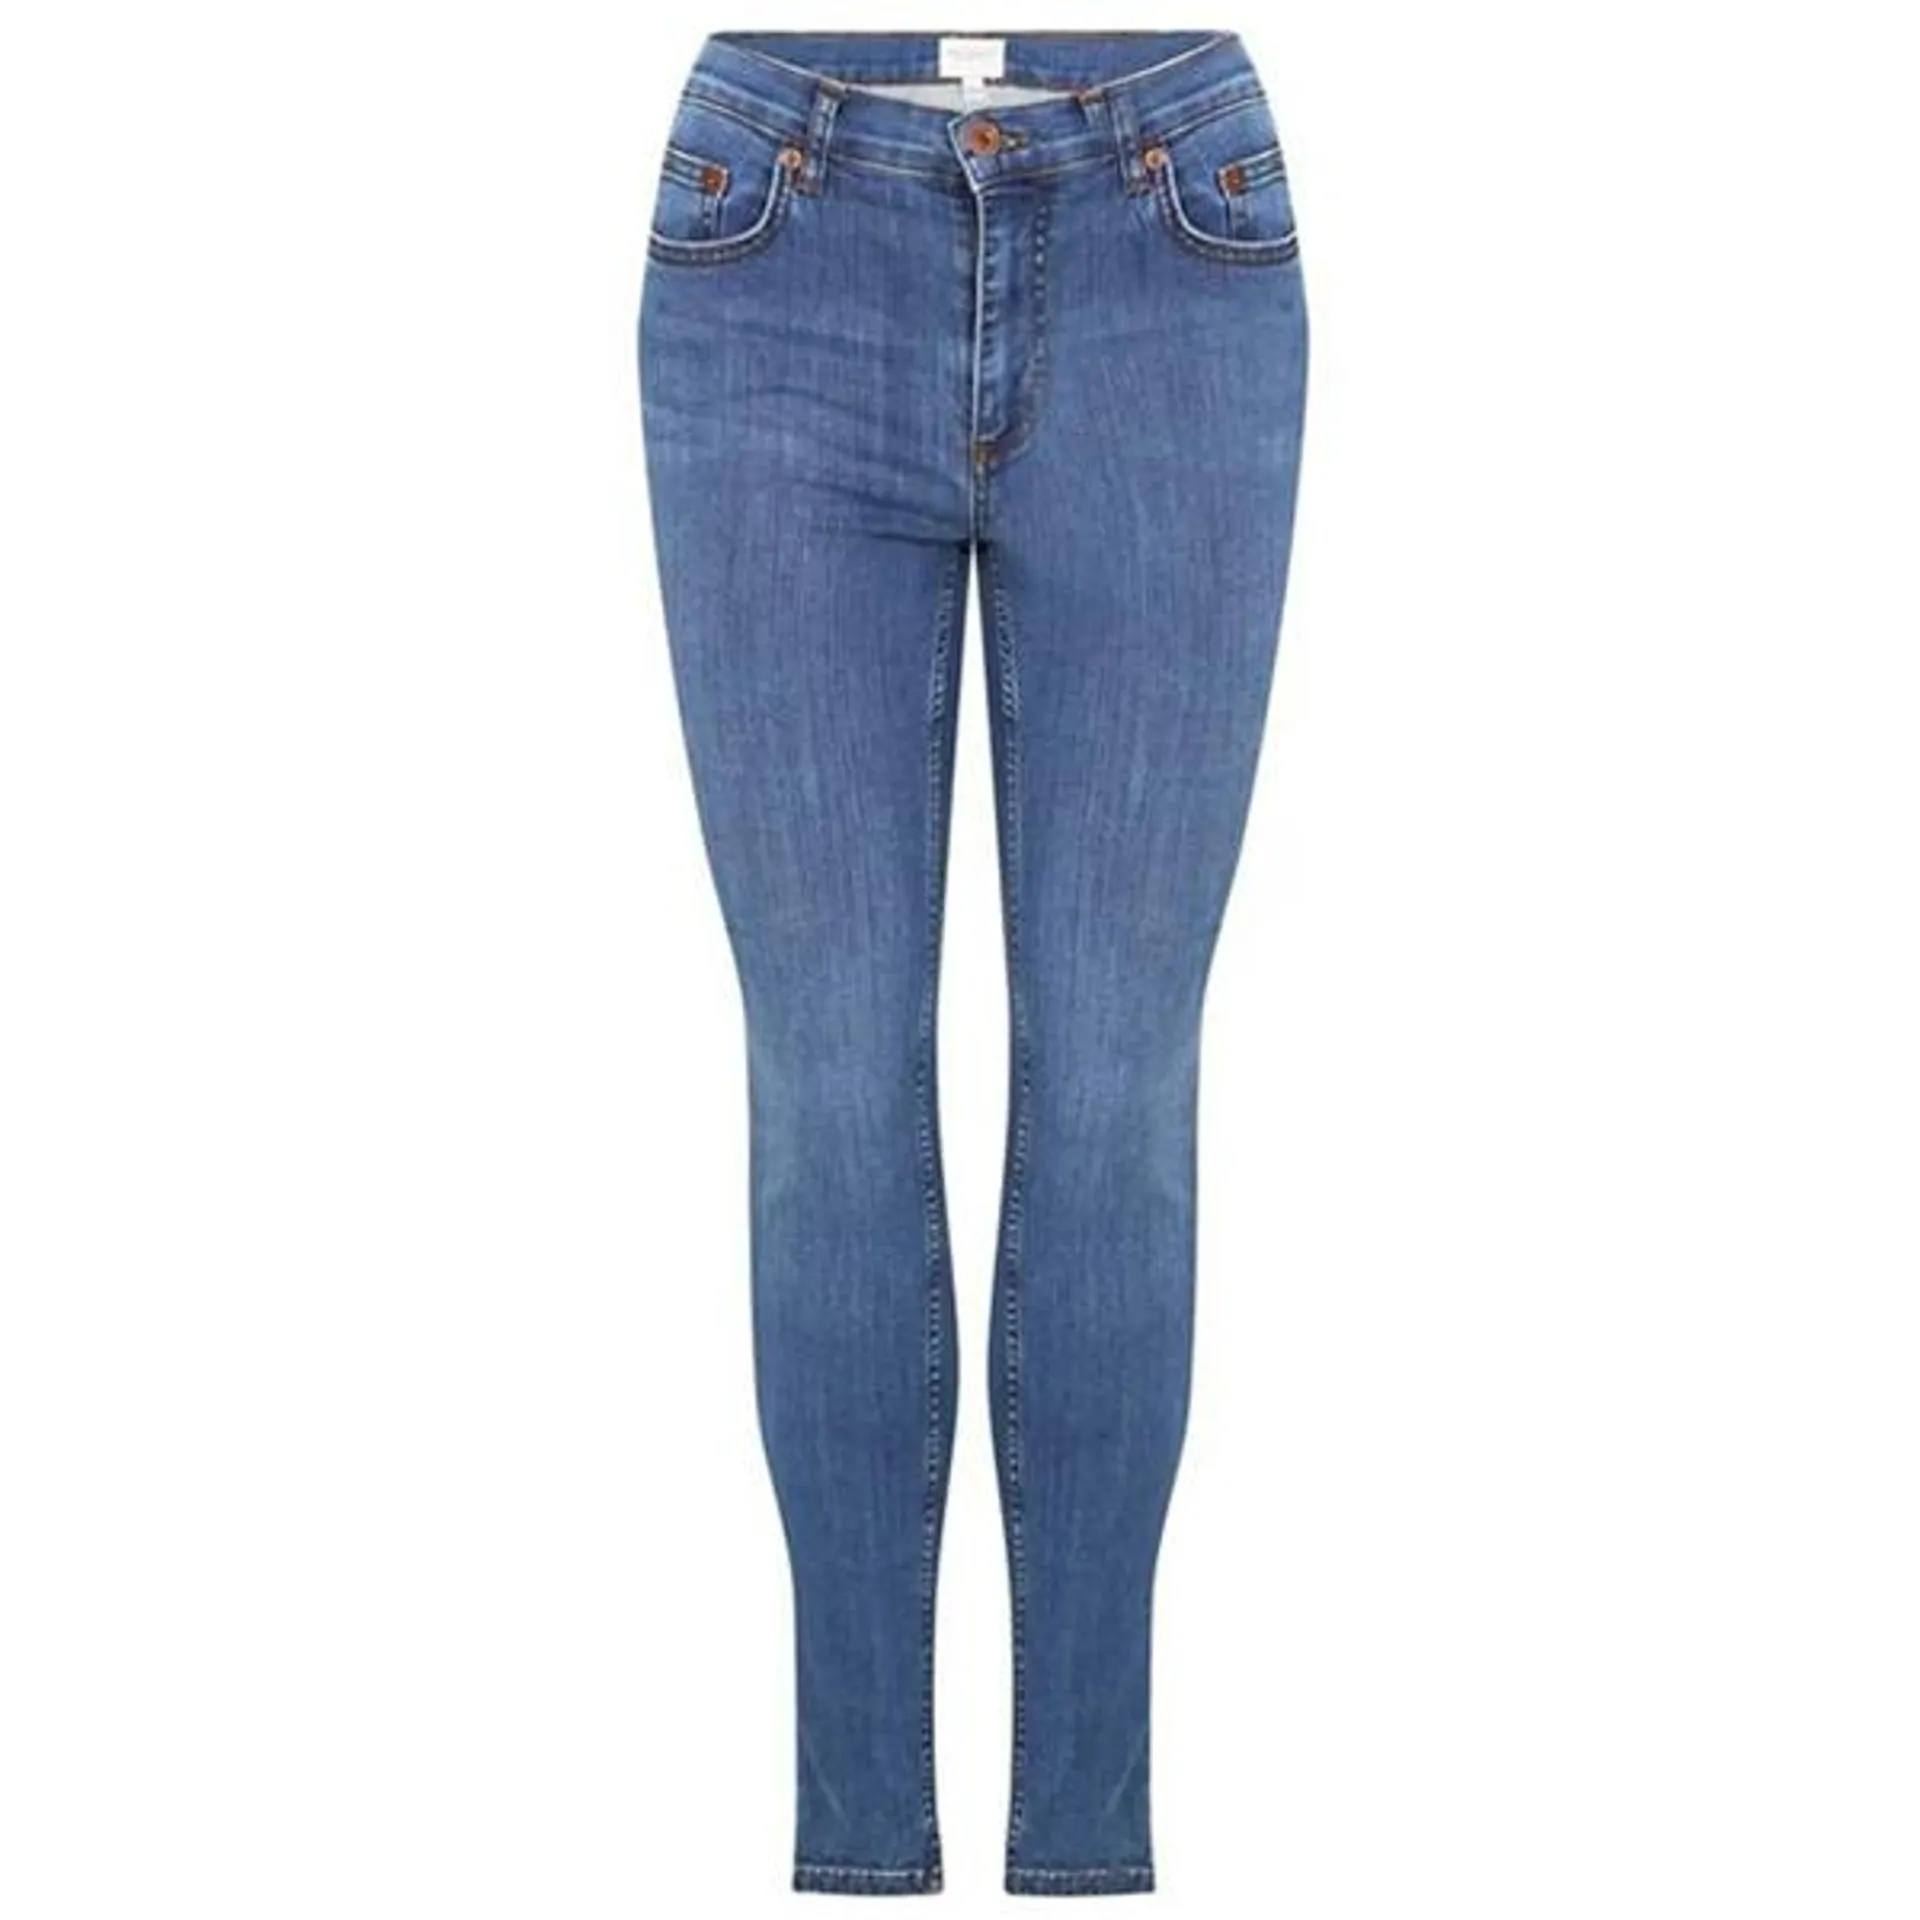 French Connection Skinny Jeans - 30 inch